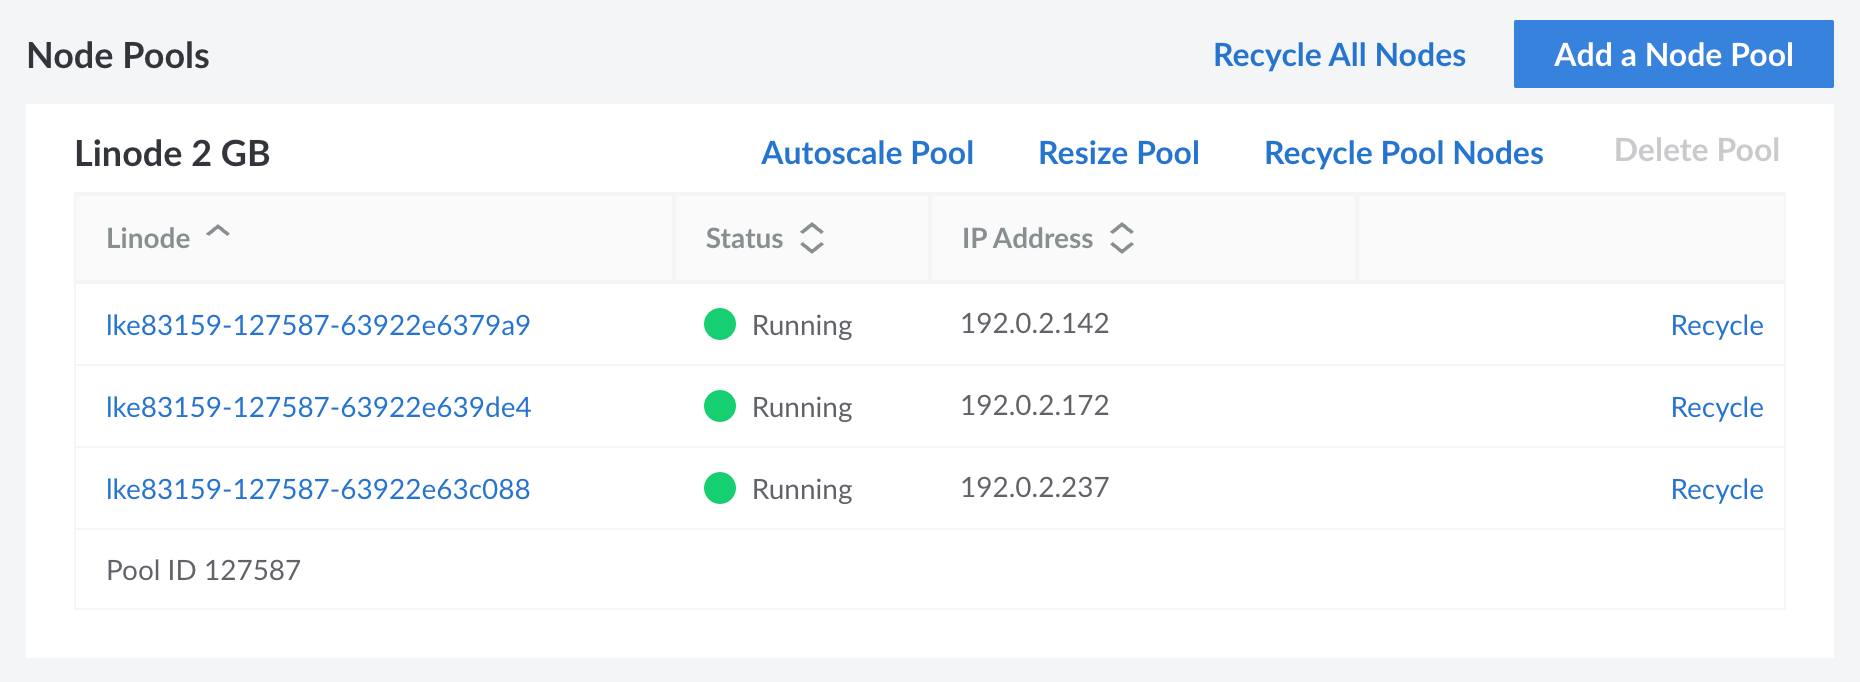 Screenshot of the Node Pools section of a cluster in the Cloud Manager